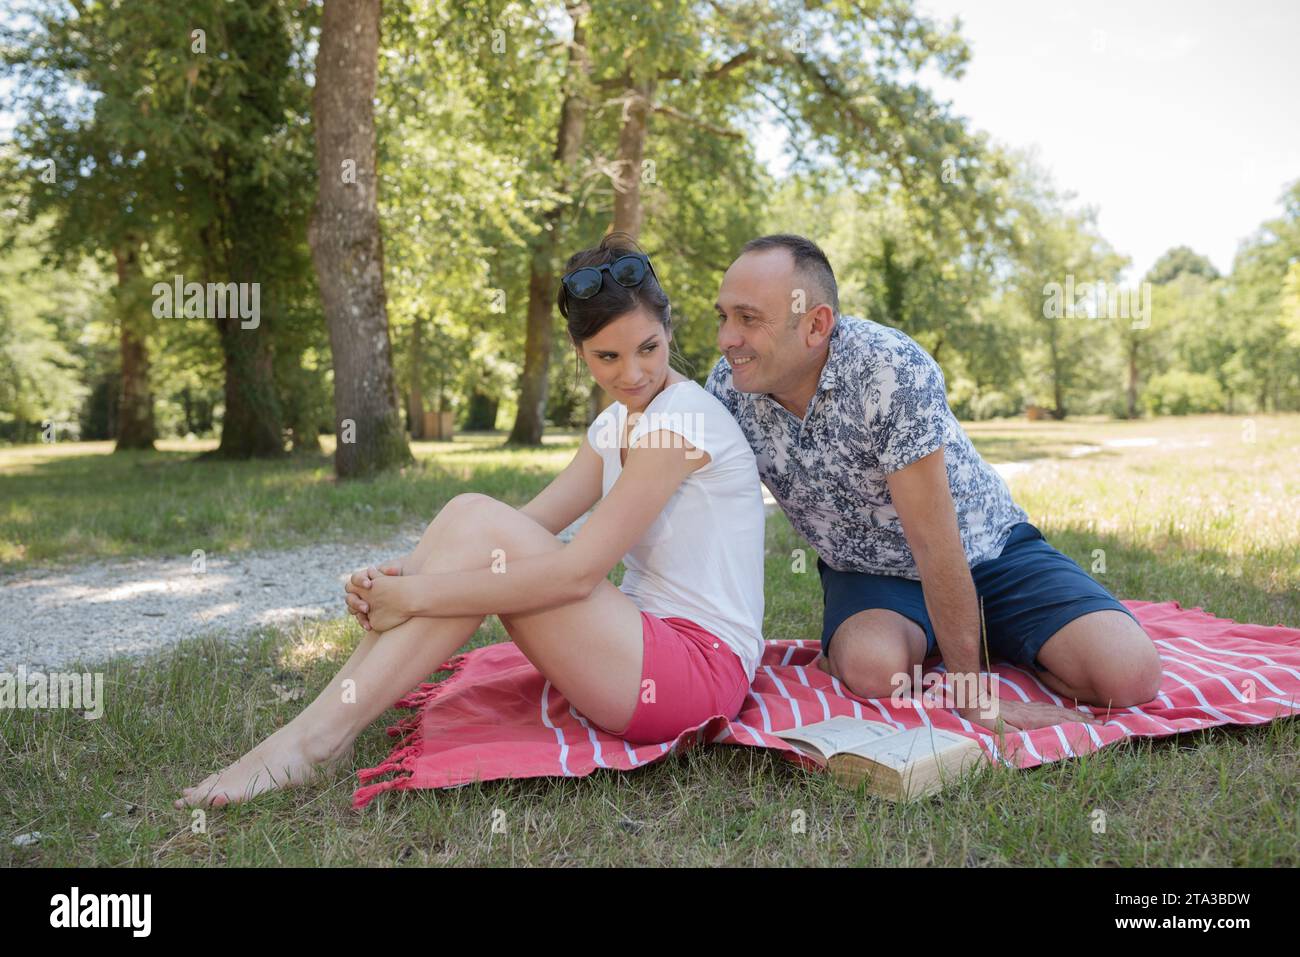 man tring to persuade sulking woman during picnic in park Stock Photo